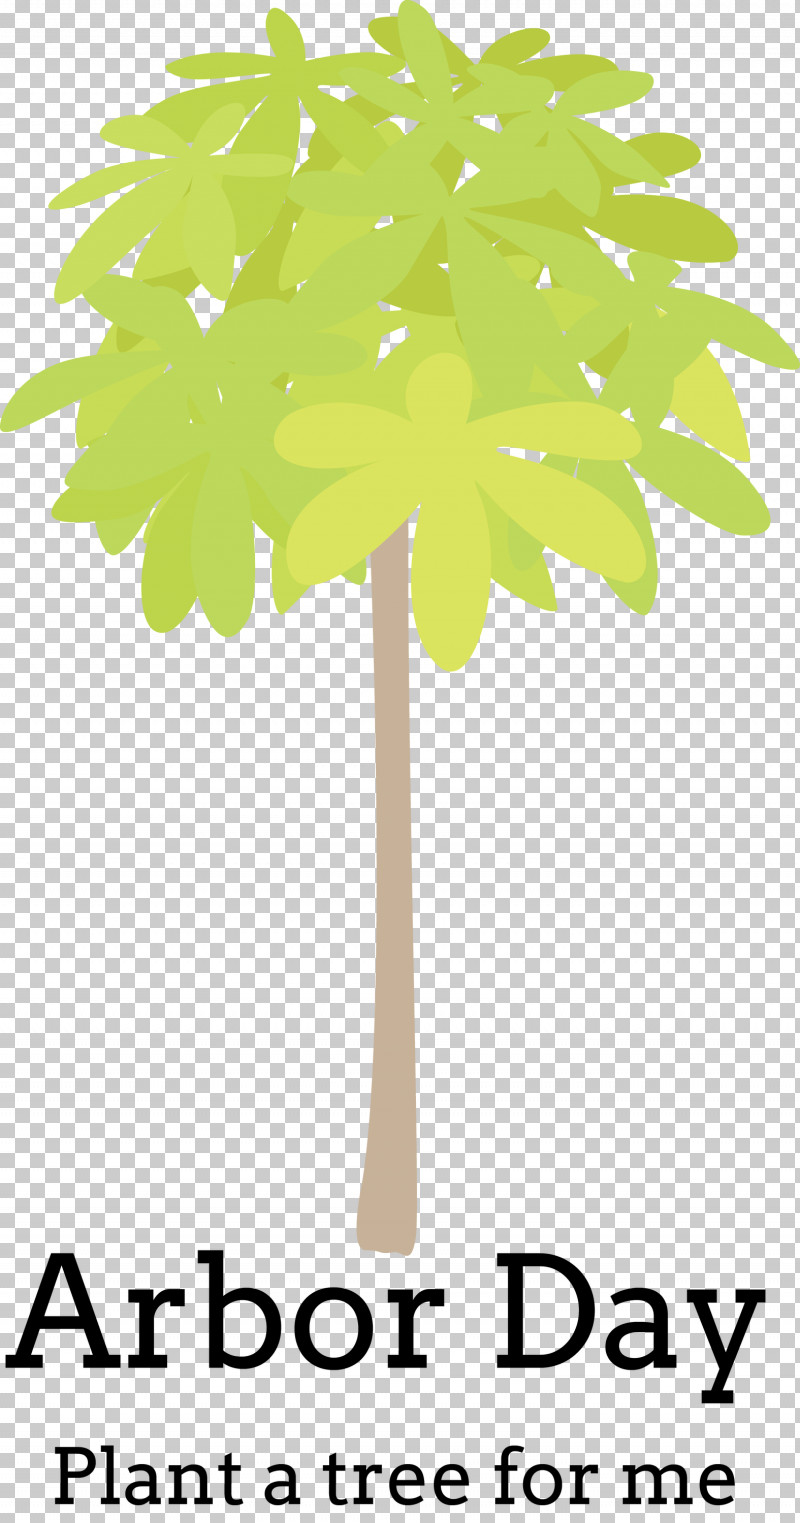 Arbor Day Green Earth Earth Day PNG, Clipart, Arbor Day, Arecales, Earth Day, Flower, Green Earth Free PNG Download